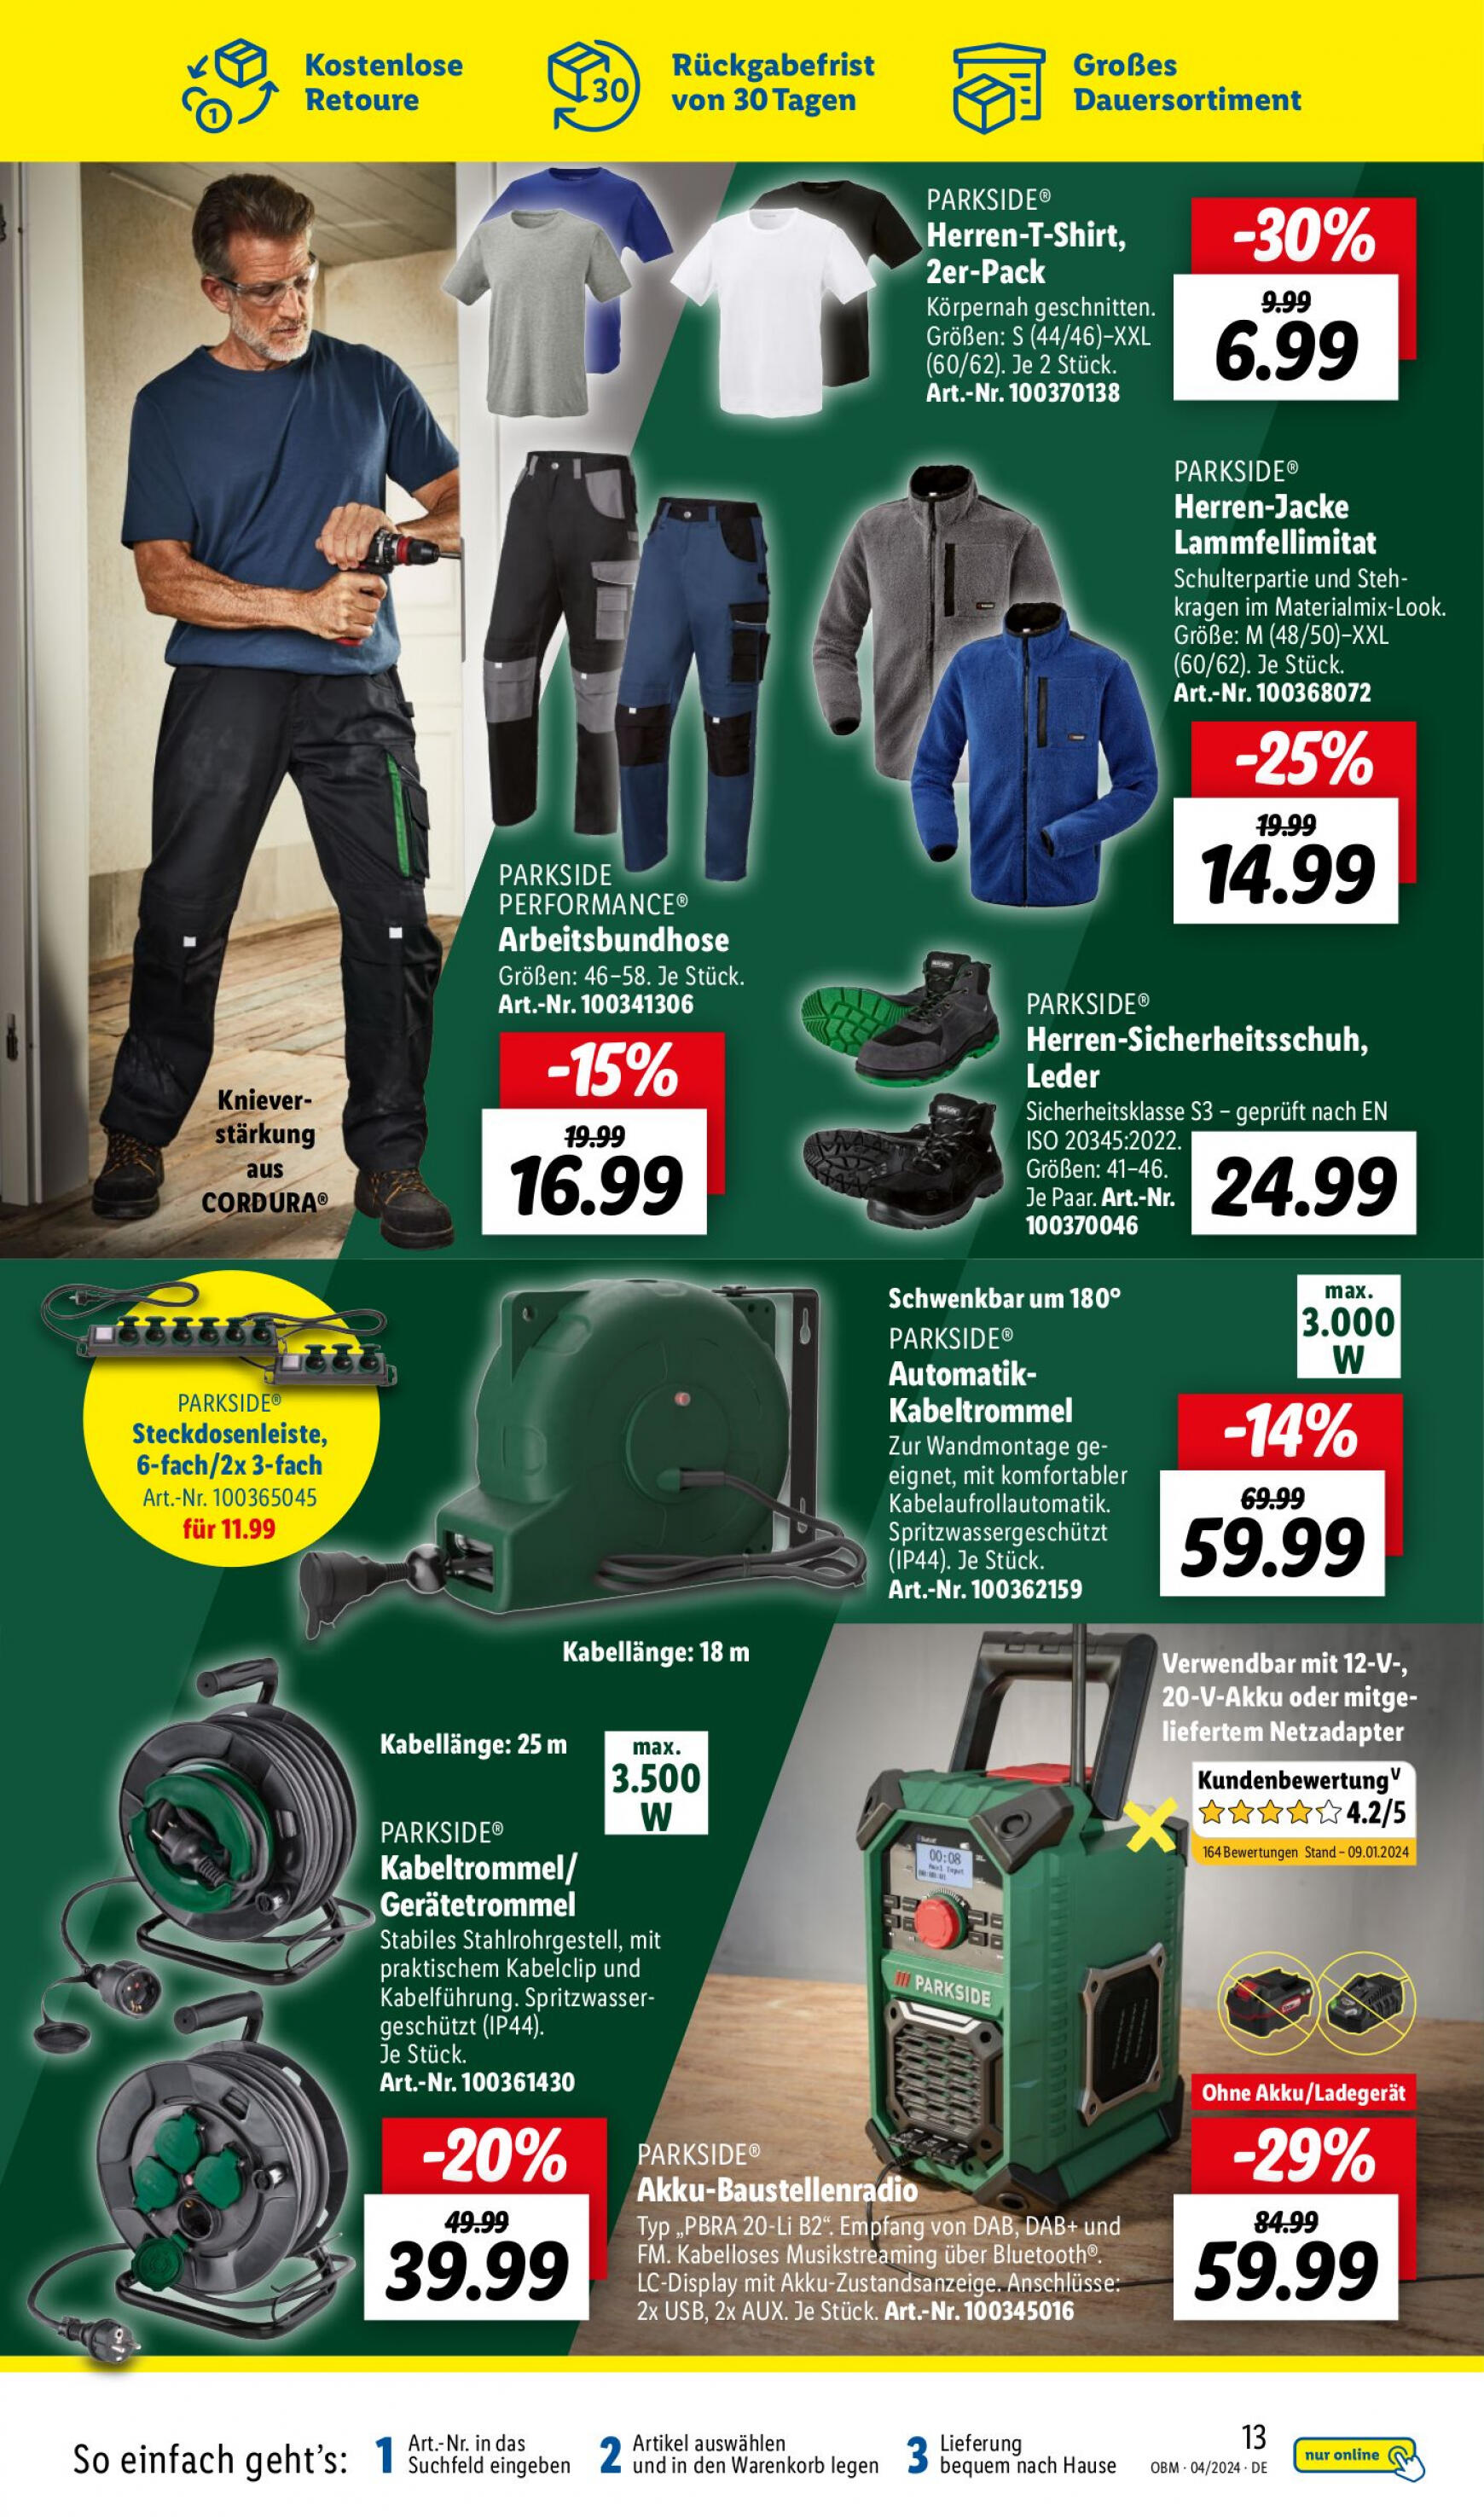 lidl - Flyer Lidl - Aktuelle Onlineshop-Highlights aktuell 01.04. - 30.04. - page: 13